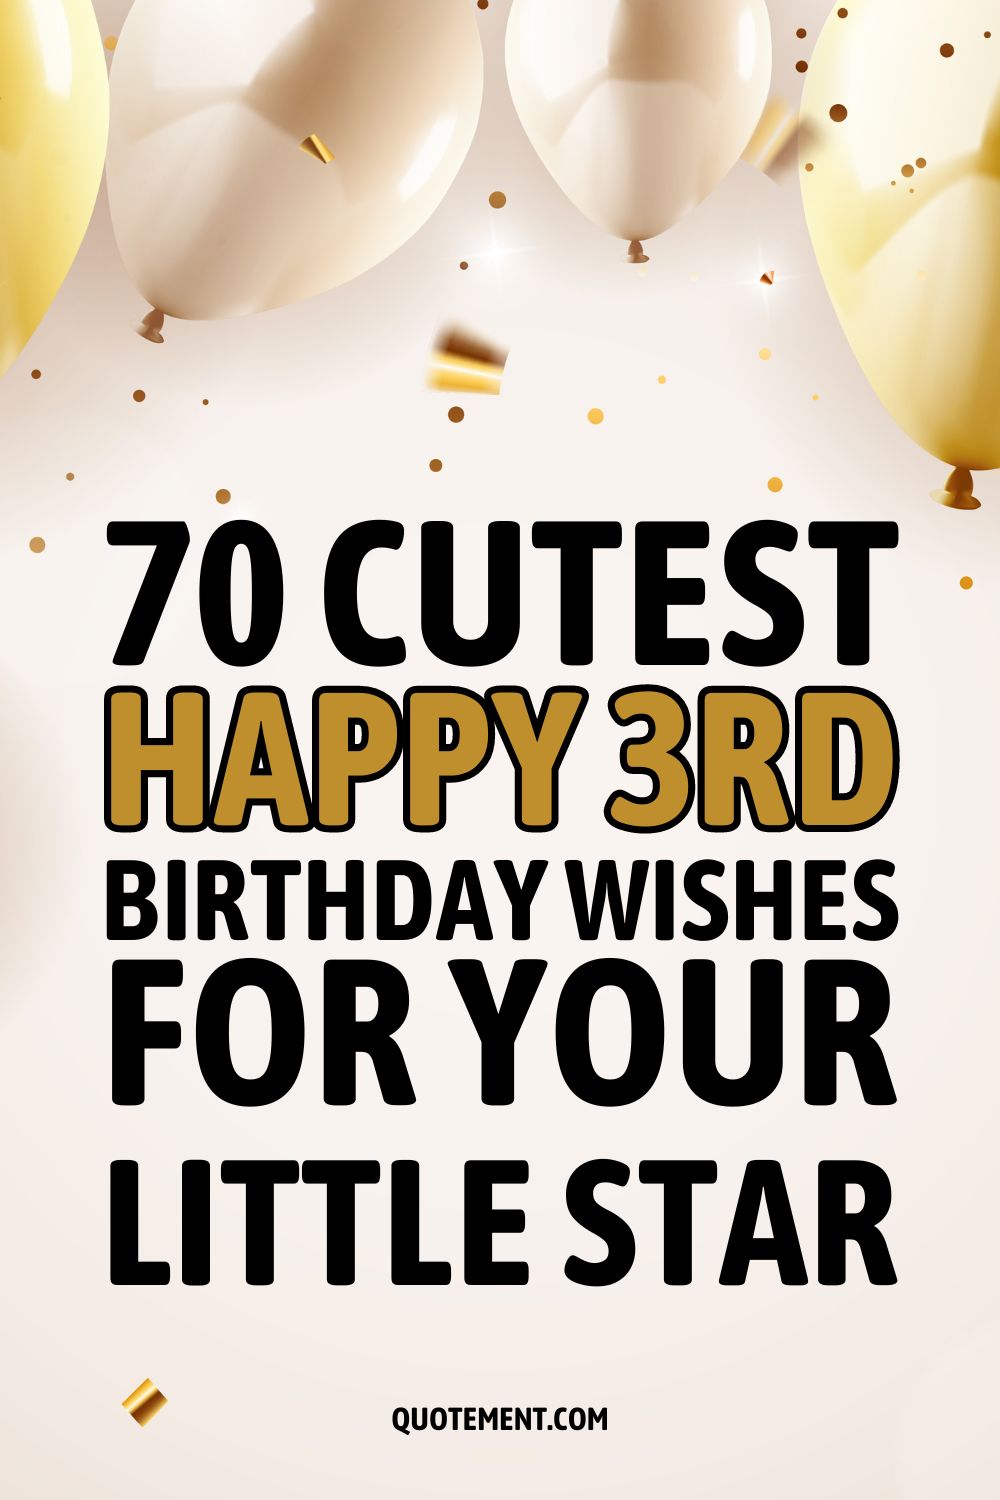 70 Cutest Happy 3rd Birthday Wishes For Your Little Star